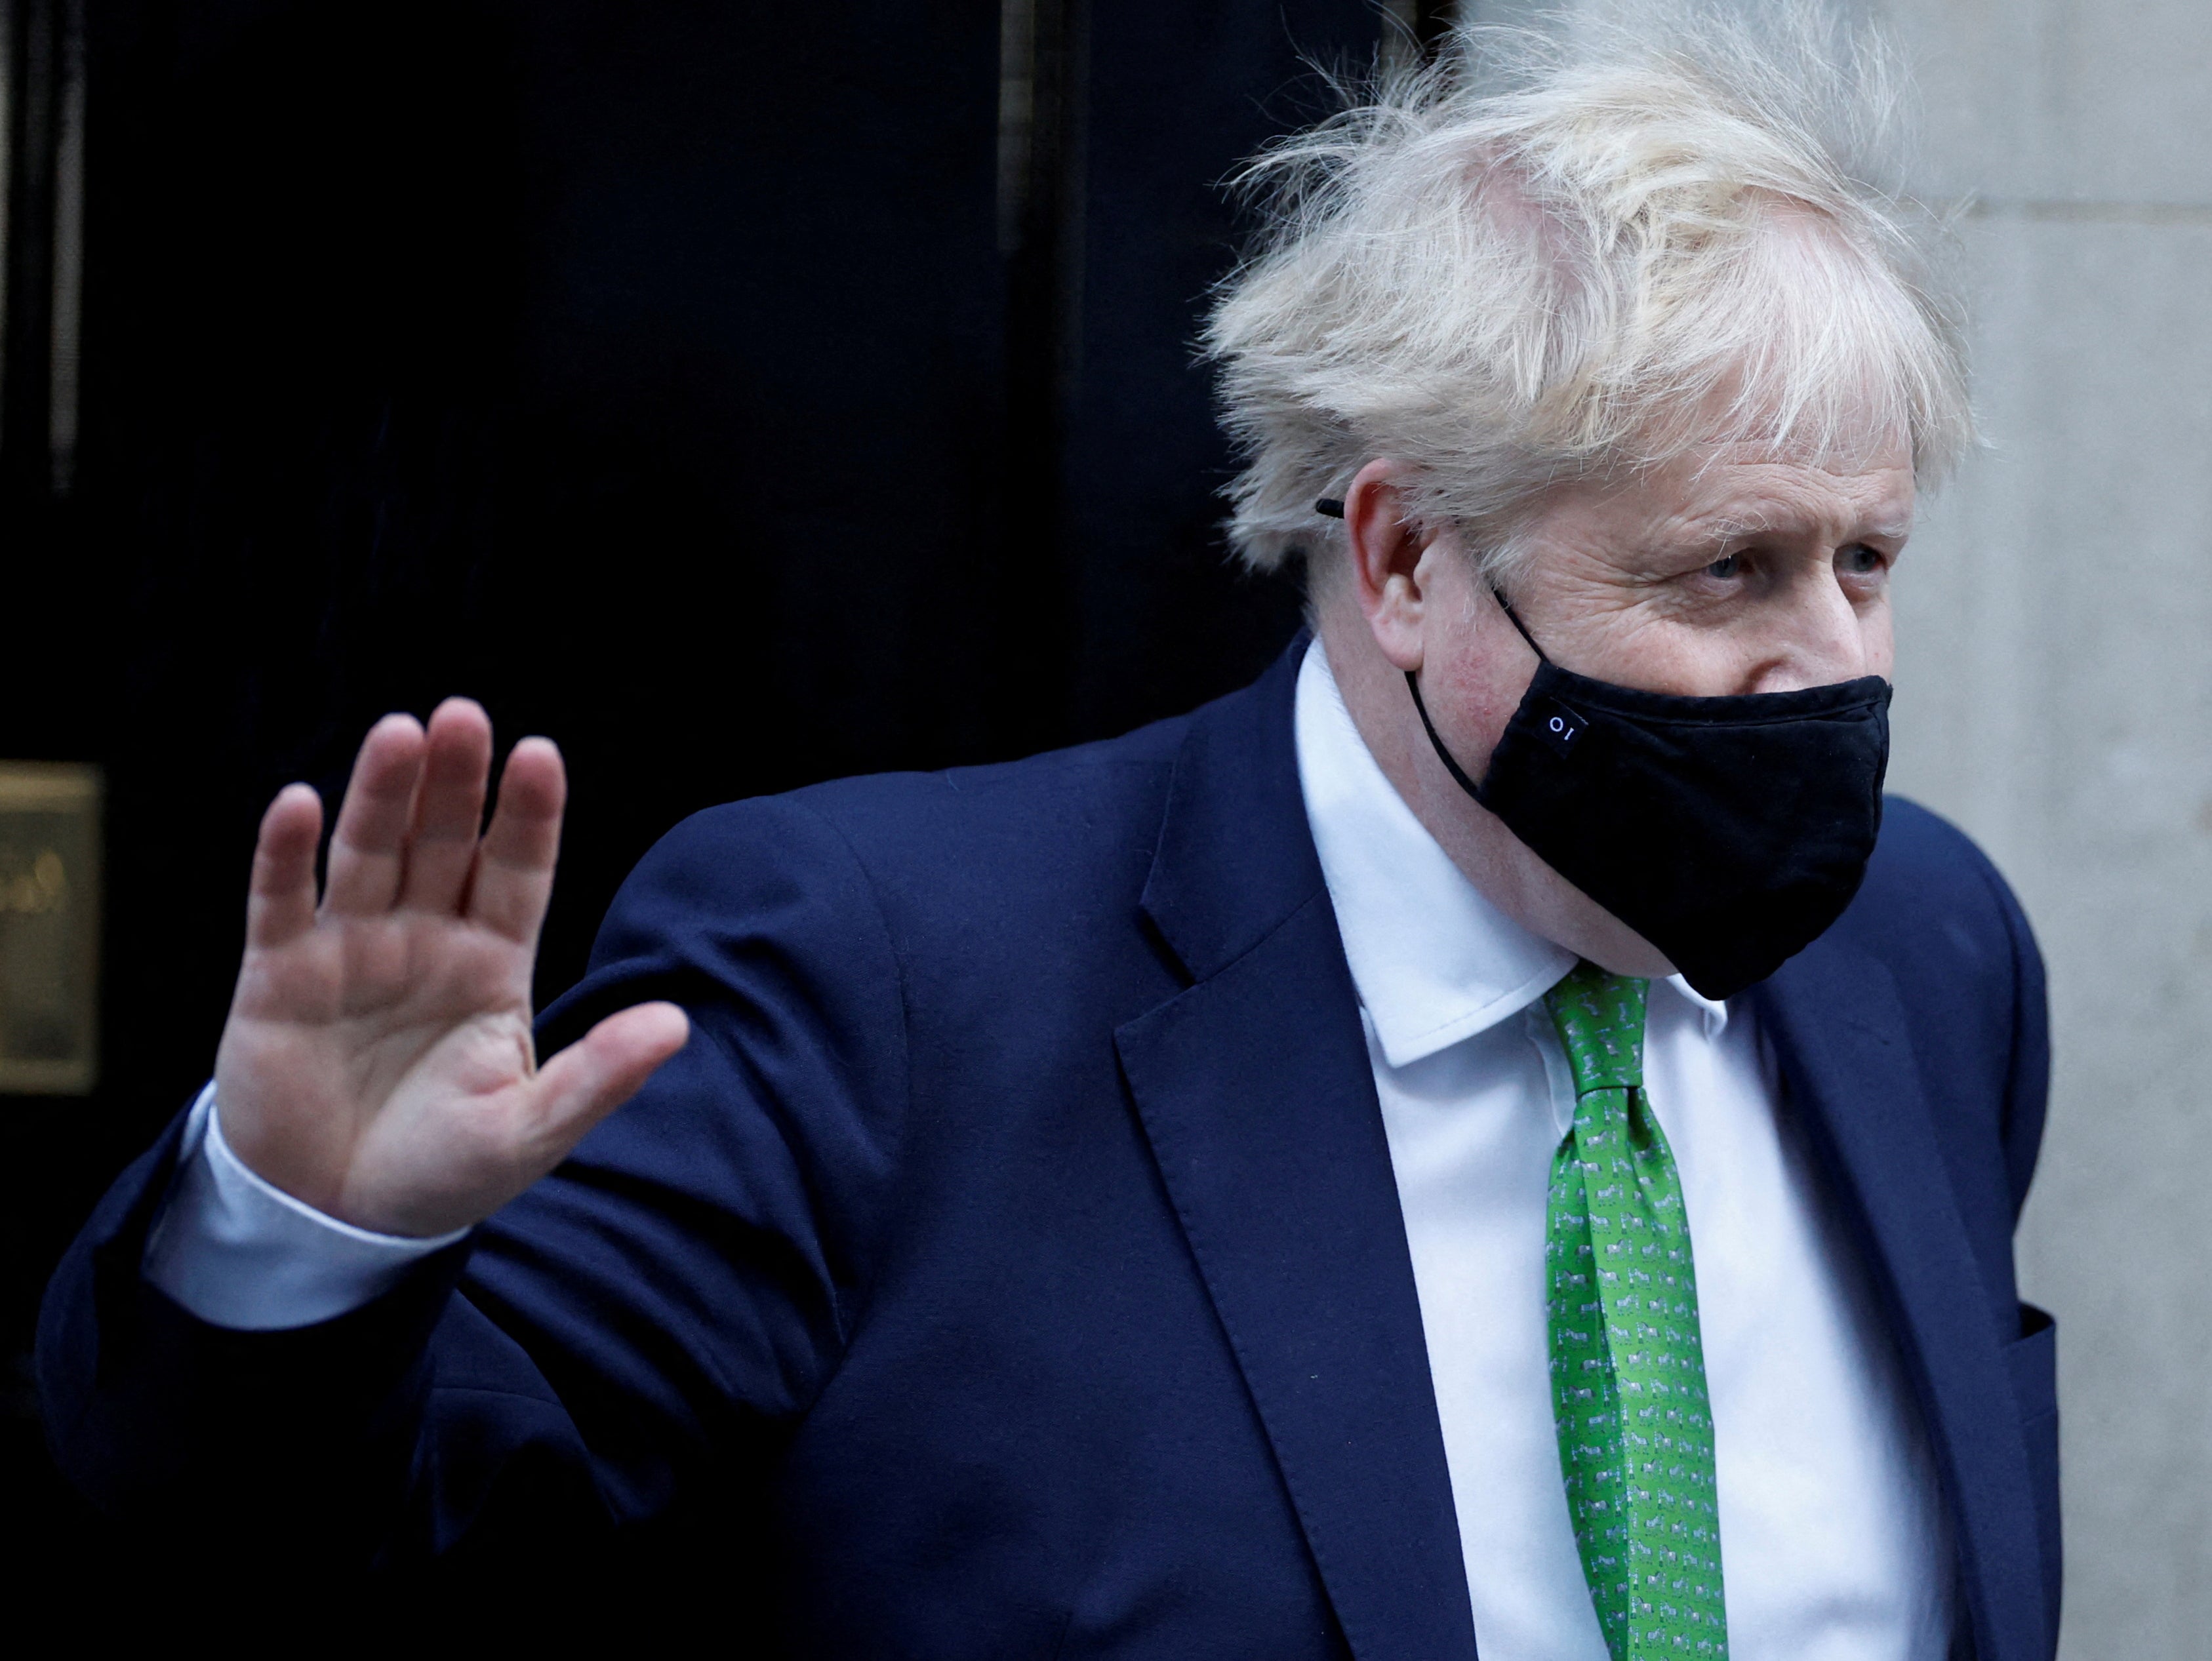 If a vote is triggered in the coming weeks and months, it means Boris Johnson would be required to have the support of over 179 of his colleagues to stay in power